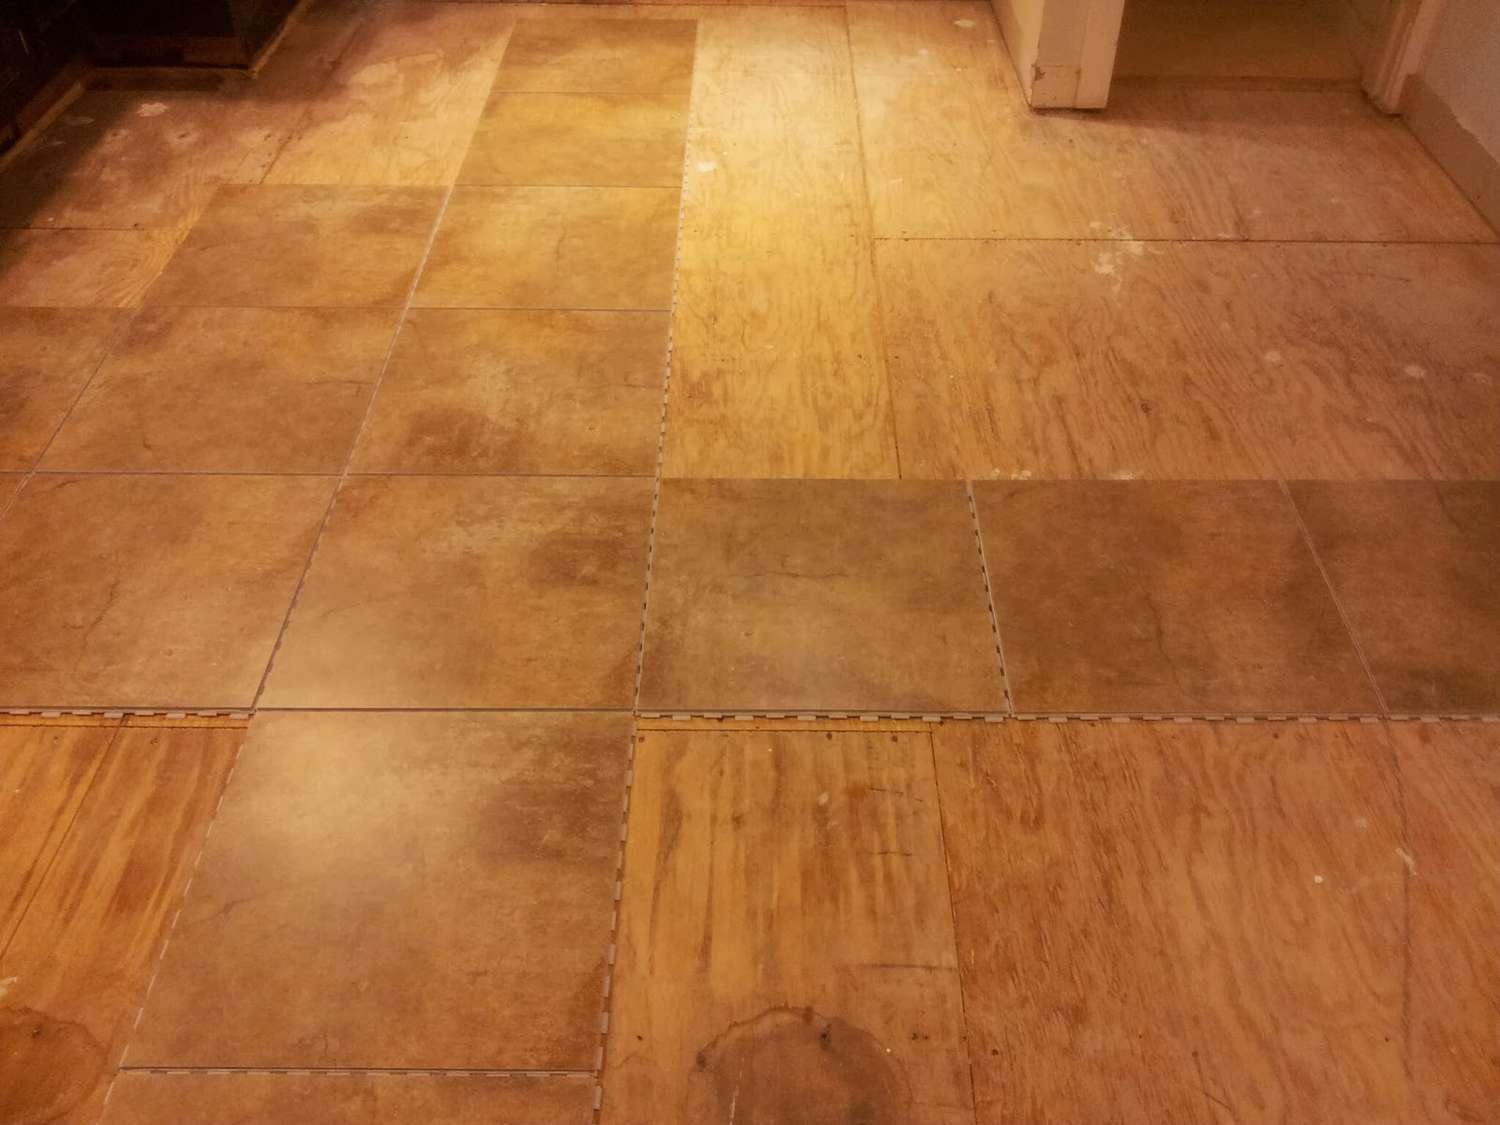 Installing Snapstone Kitchen Floor Tile for our Home Remodel